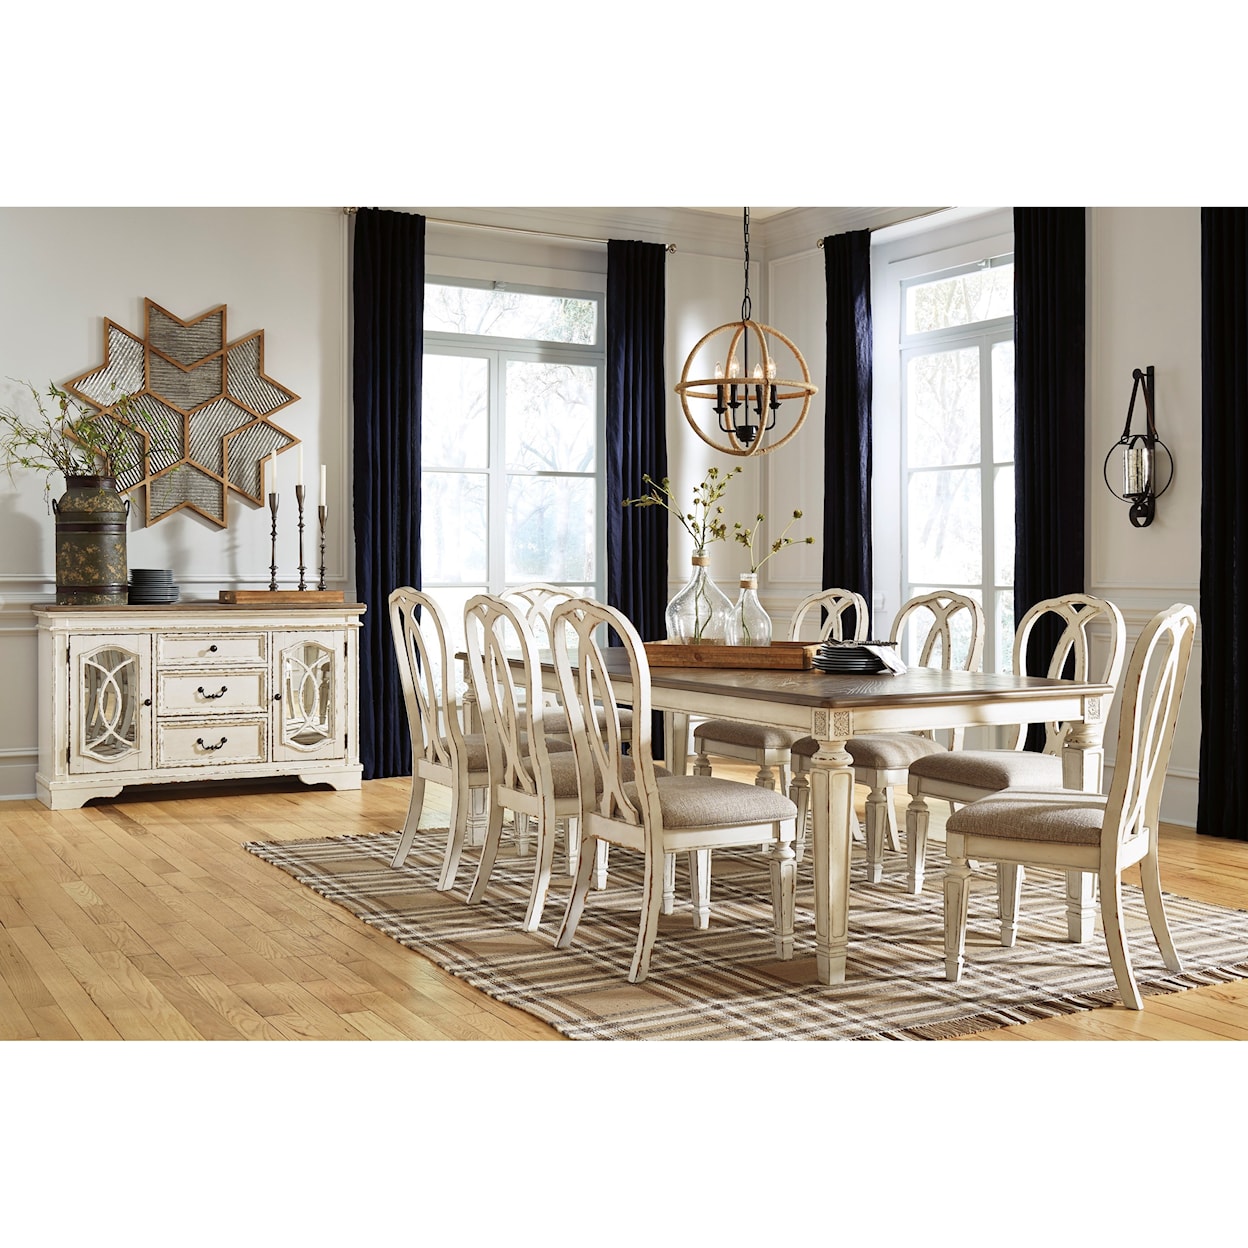 Benchcraft Realyn Formal Dining Room Group